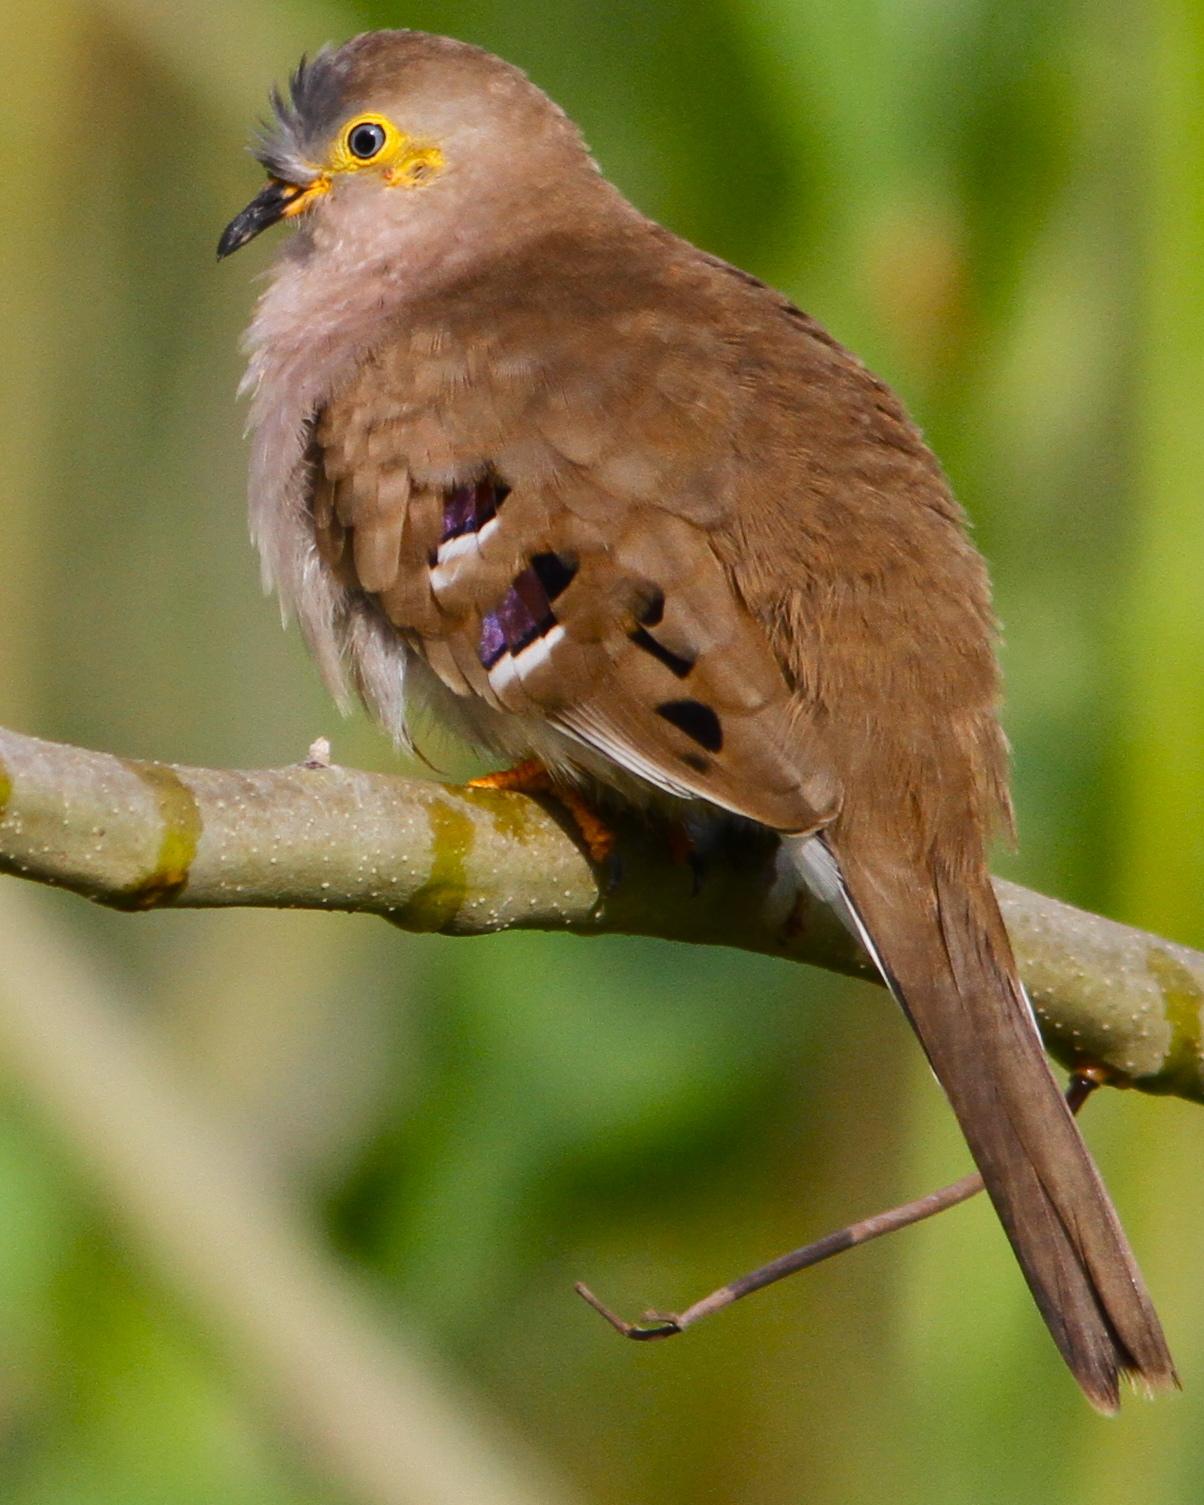 Long-tailed Ground Dove Photo by Marcelo Padua